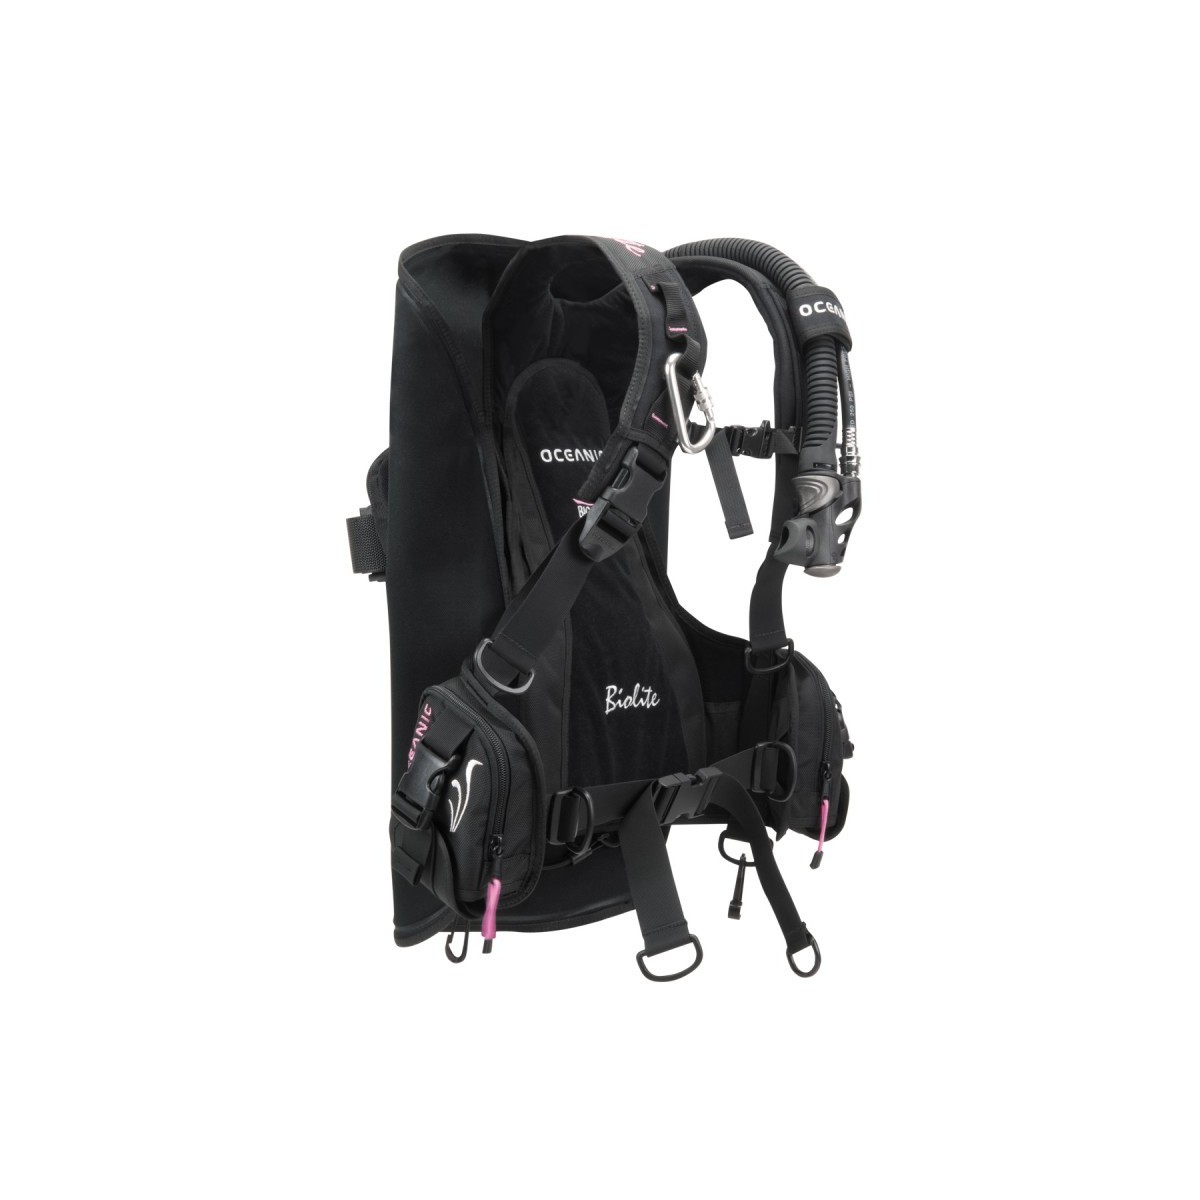 New Oceanic BioLite Travel BCD With Air XS 2 Inflator